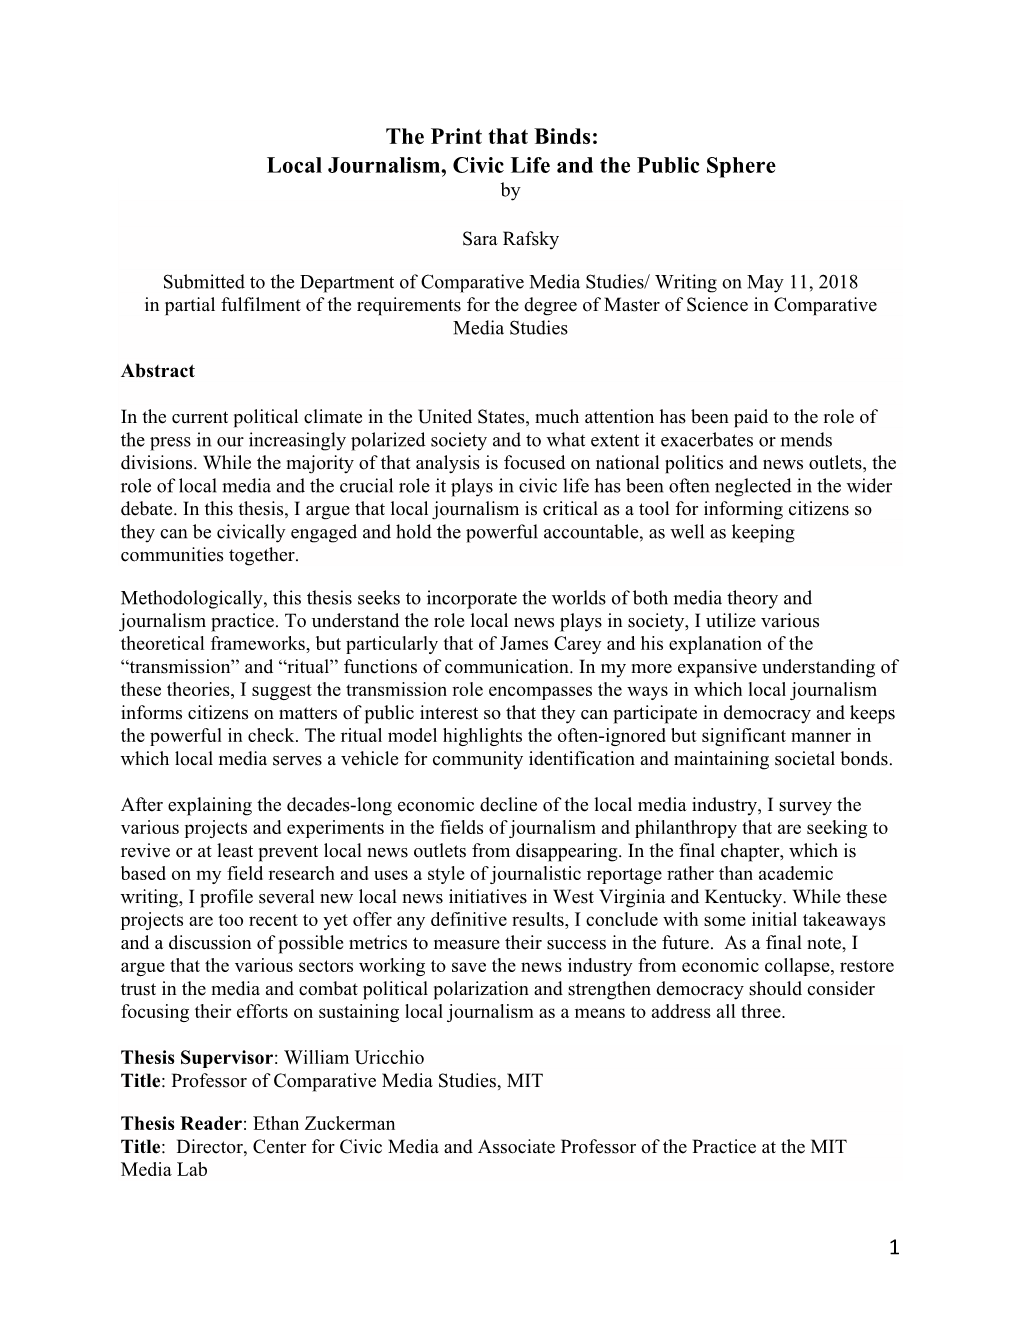 1 the Print That Binds: Local Journalism, Civic Life and the Public Sphere